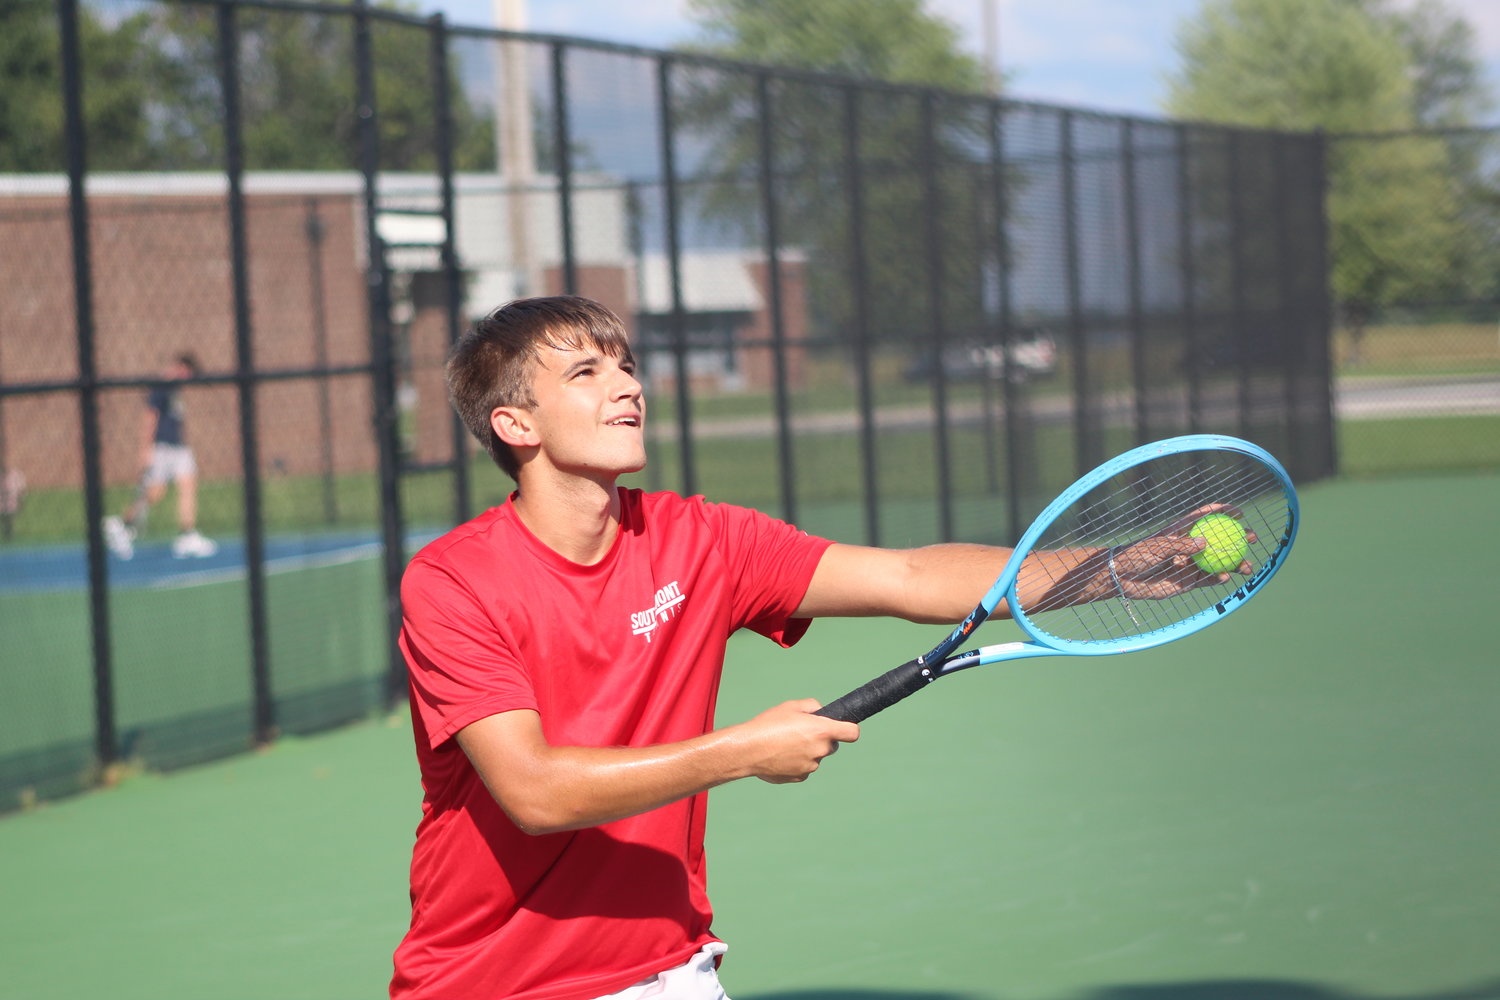 Adam Cox made quick work of his opponent as he took care of business 6-0, 6-0.